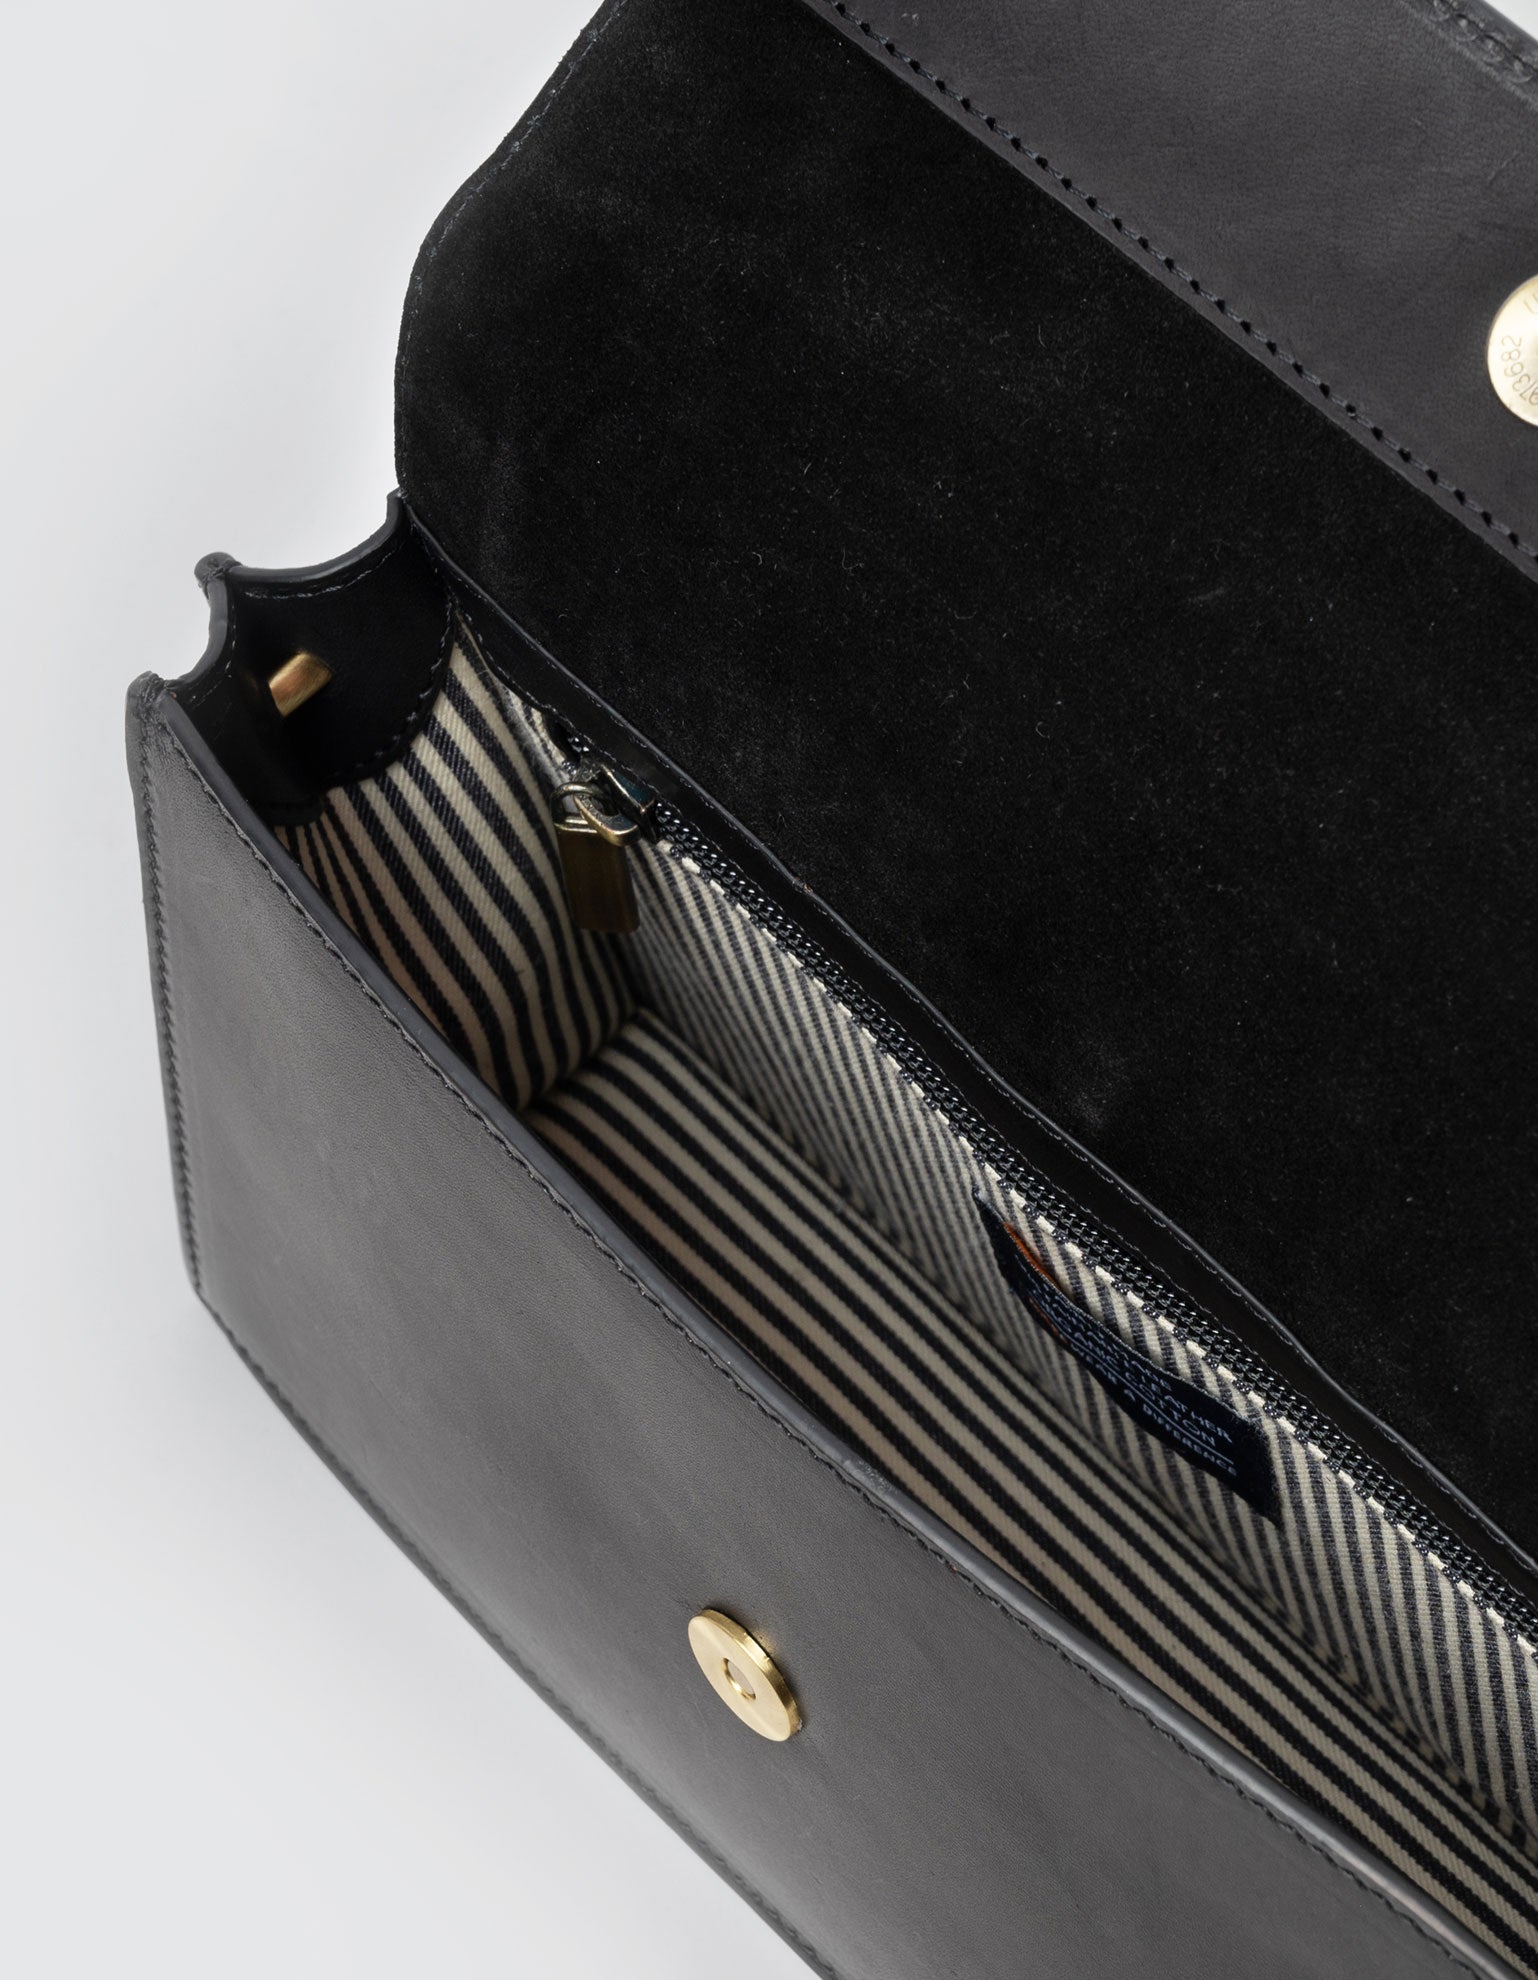 Stella in black classic leather. Inside bag product image.